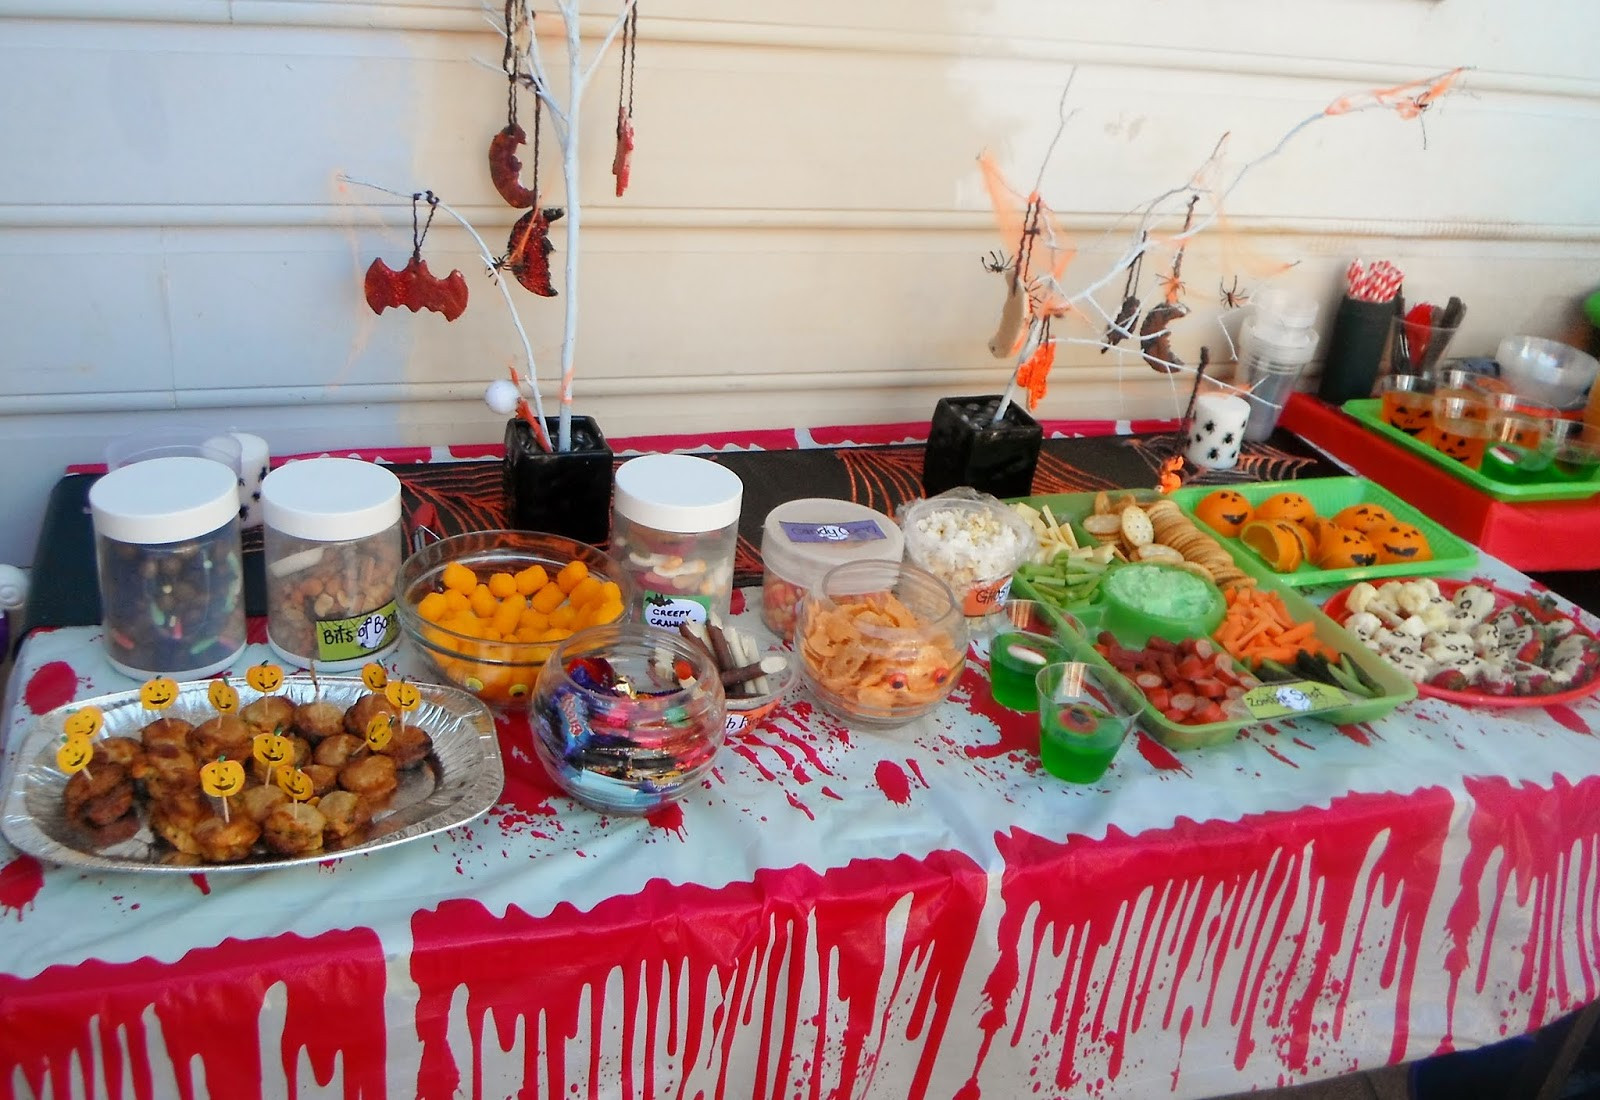 Halloween Birthday Party Food Ideas
 Adventures at home with Mum Halloween Party Food